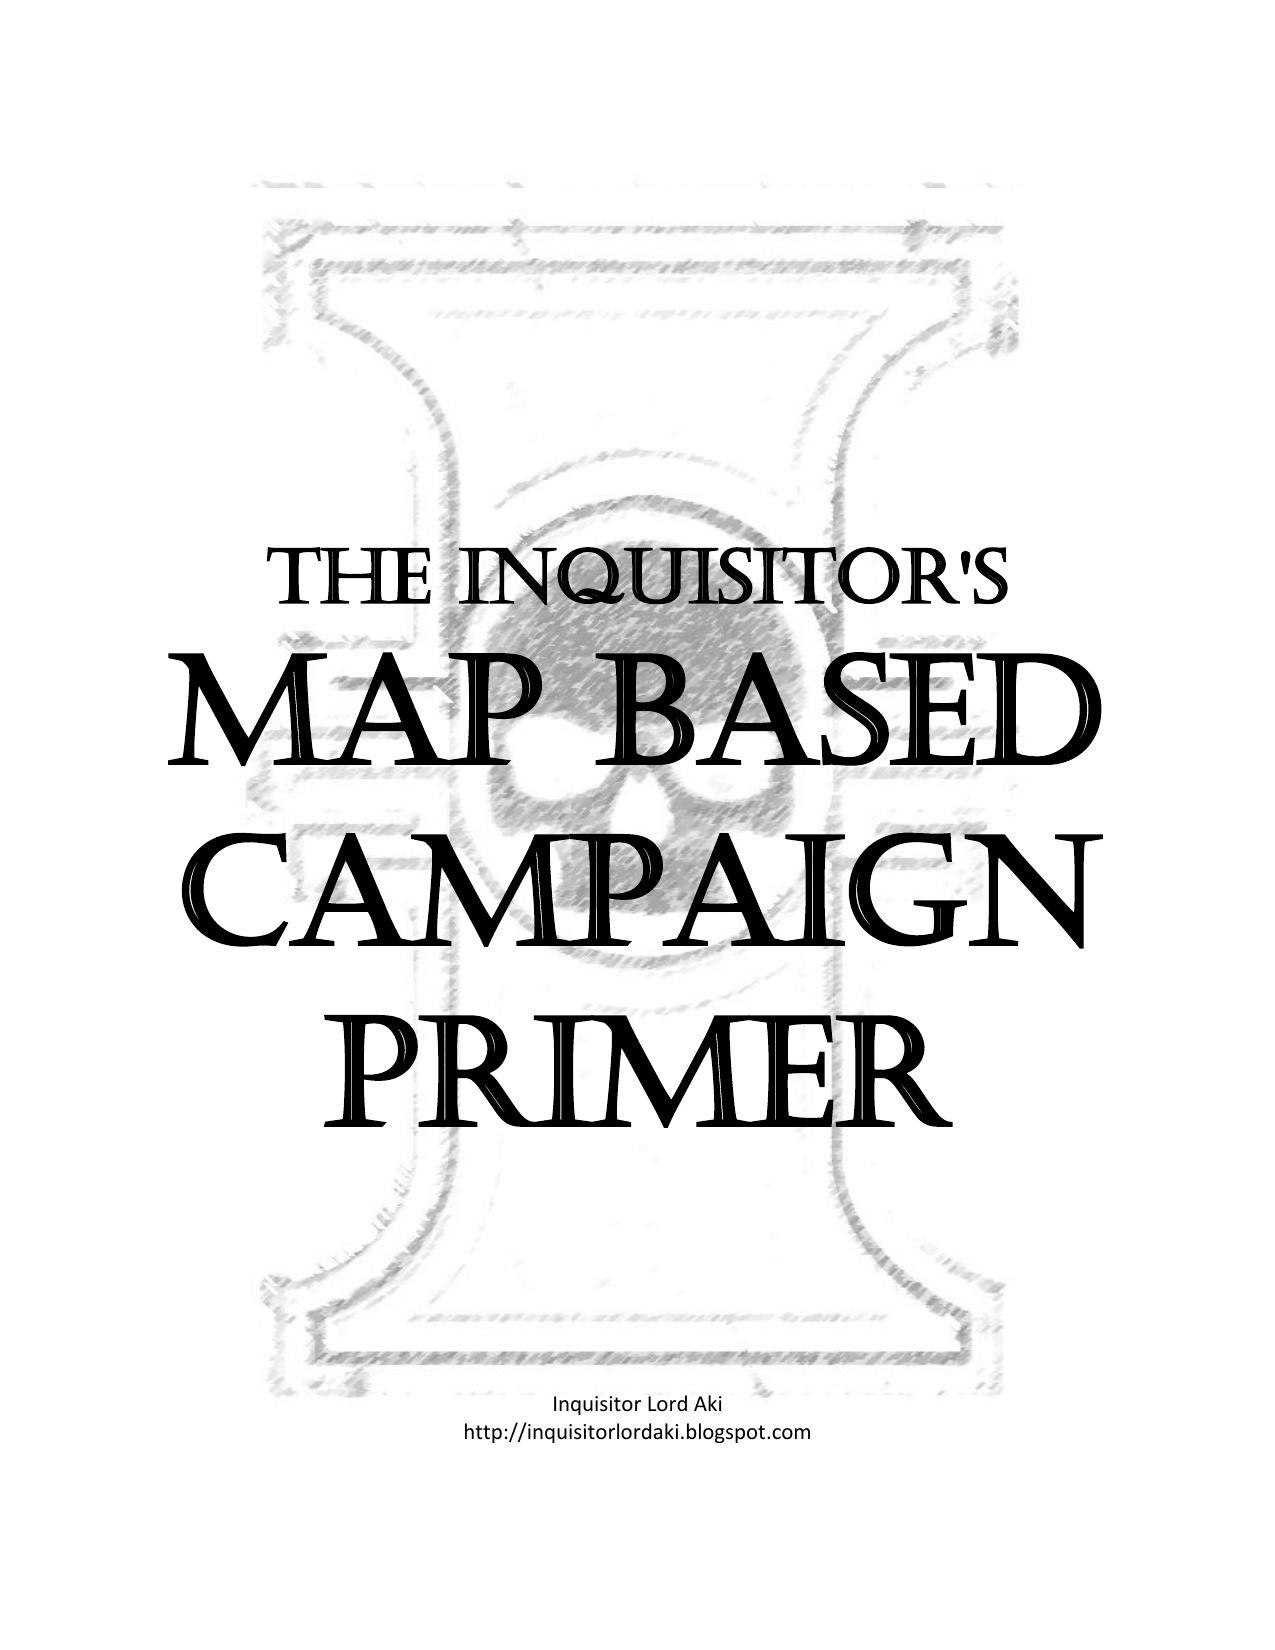 The Inquisitor's Map Based Campaign Primer